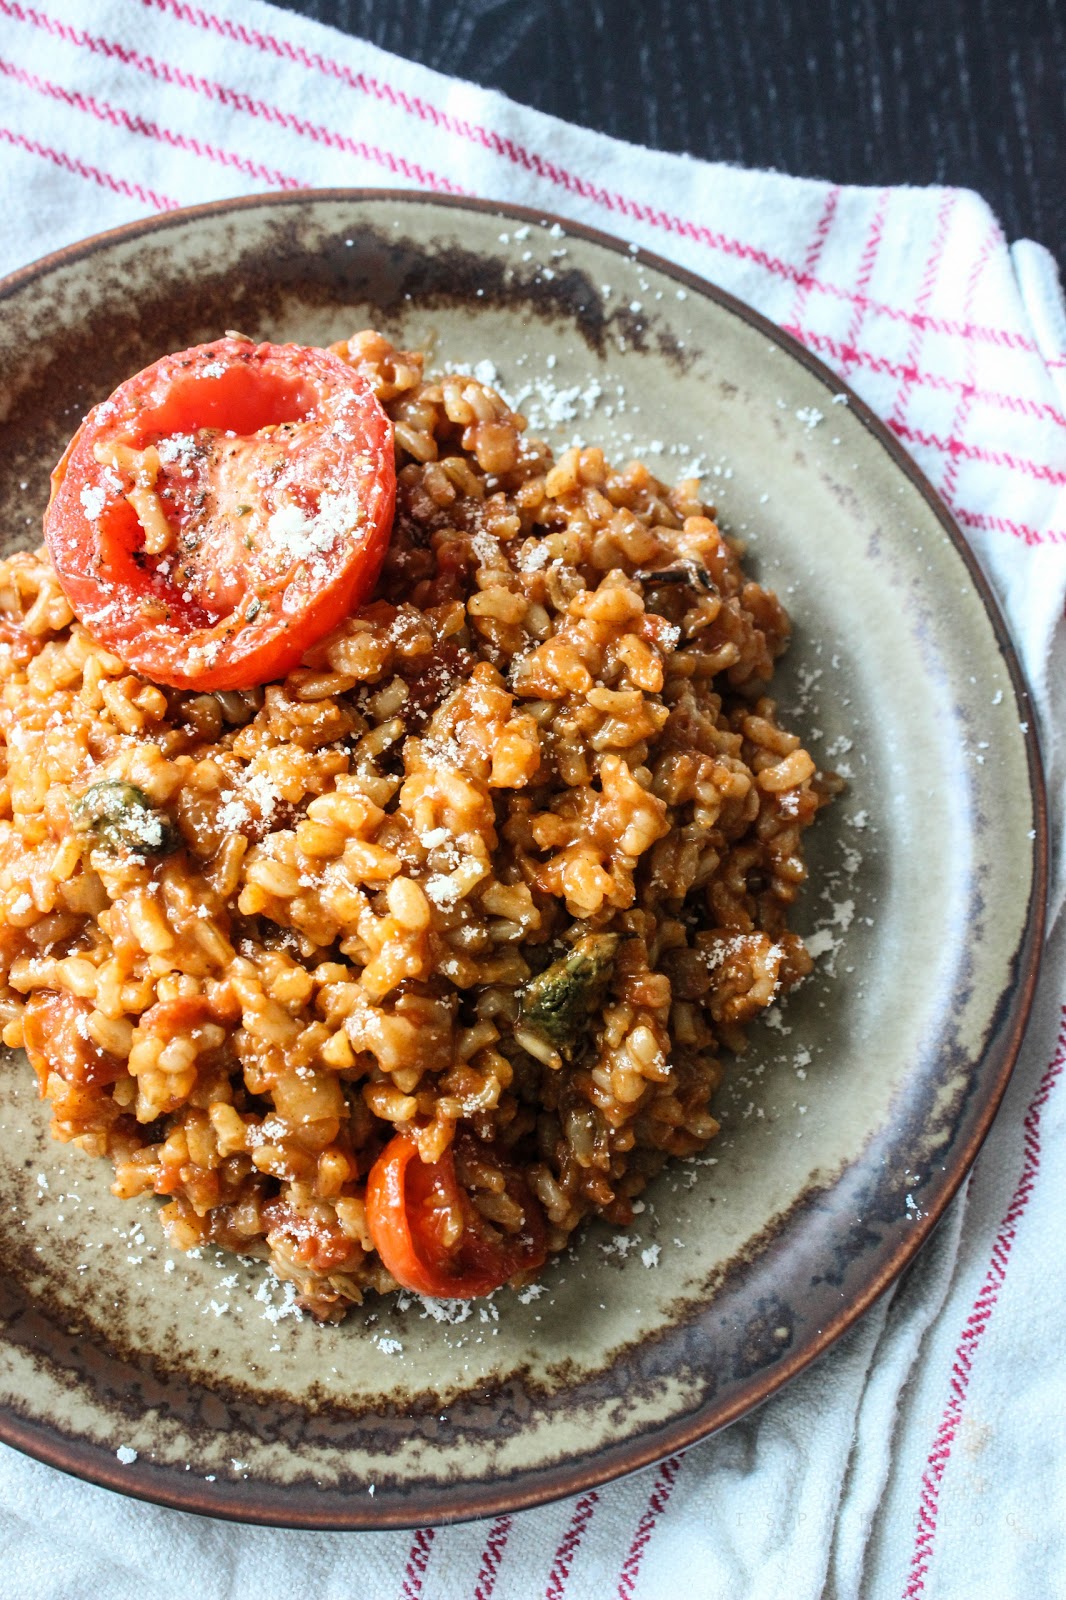 Roasted Tomato Risotto With Smoked Mussels - Nature Whisper